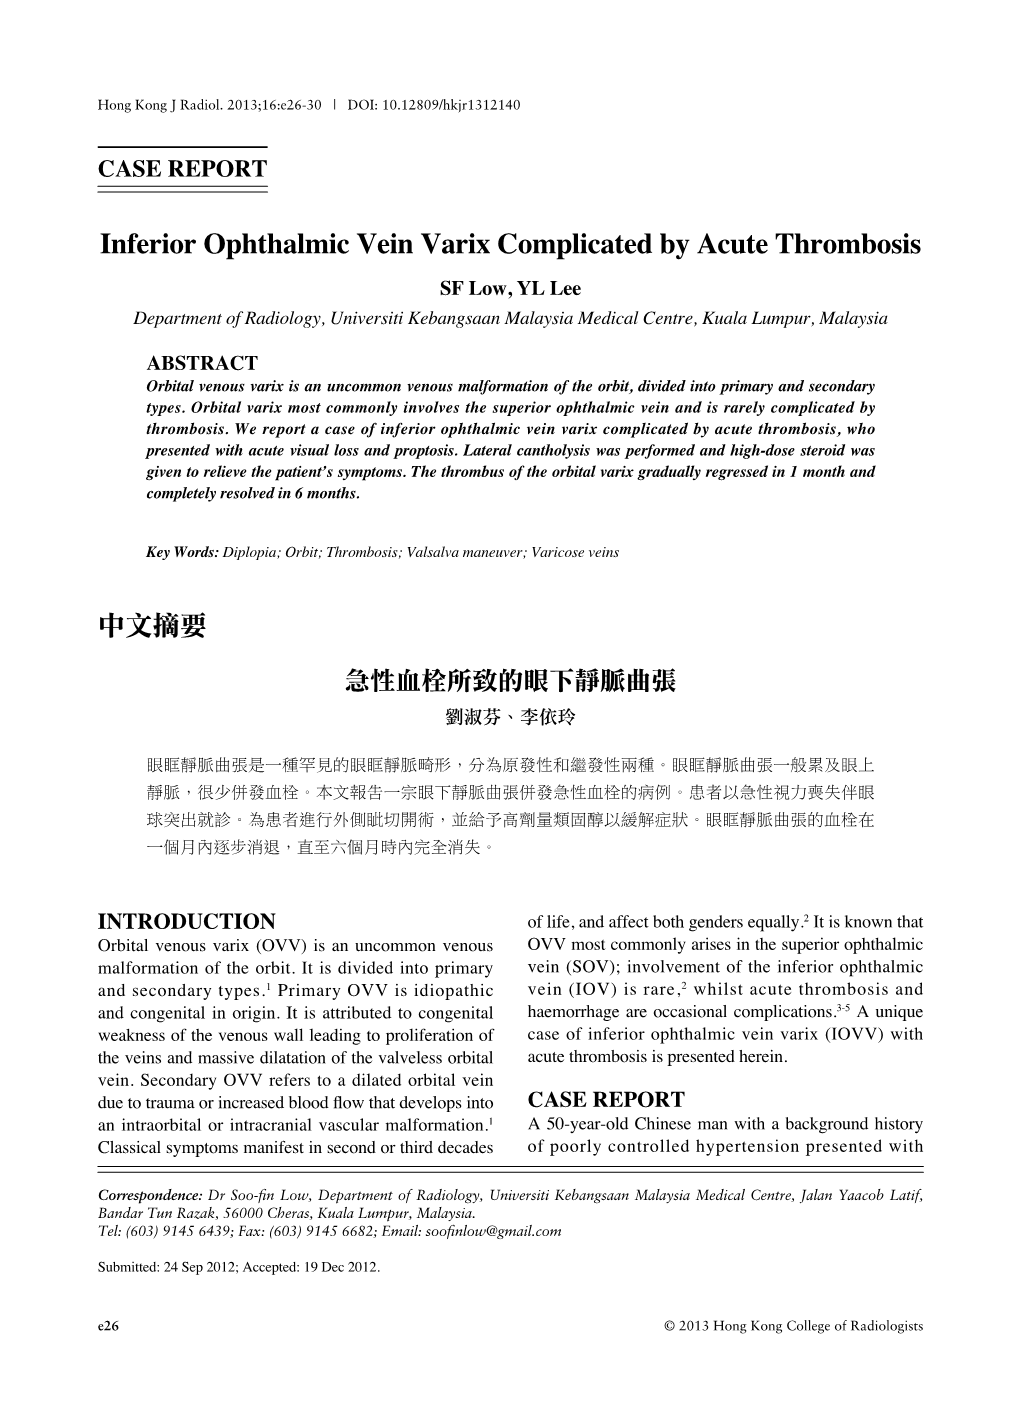 Inferior Ophthalmic Vein Varix Complicated by Acute Thrombosis